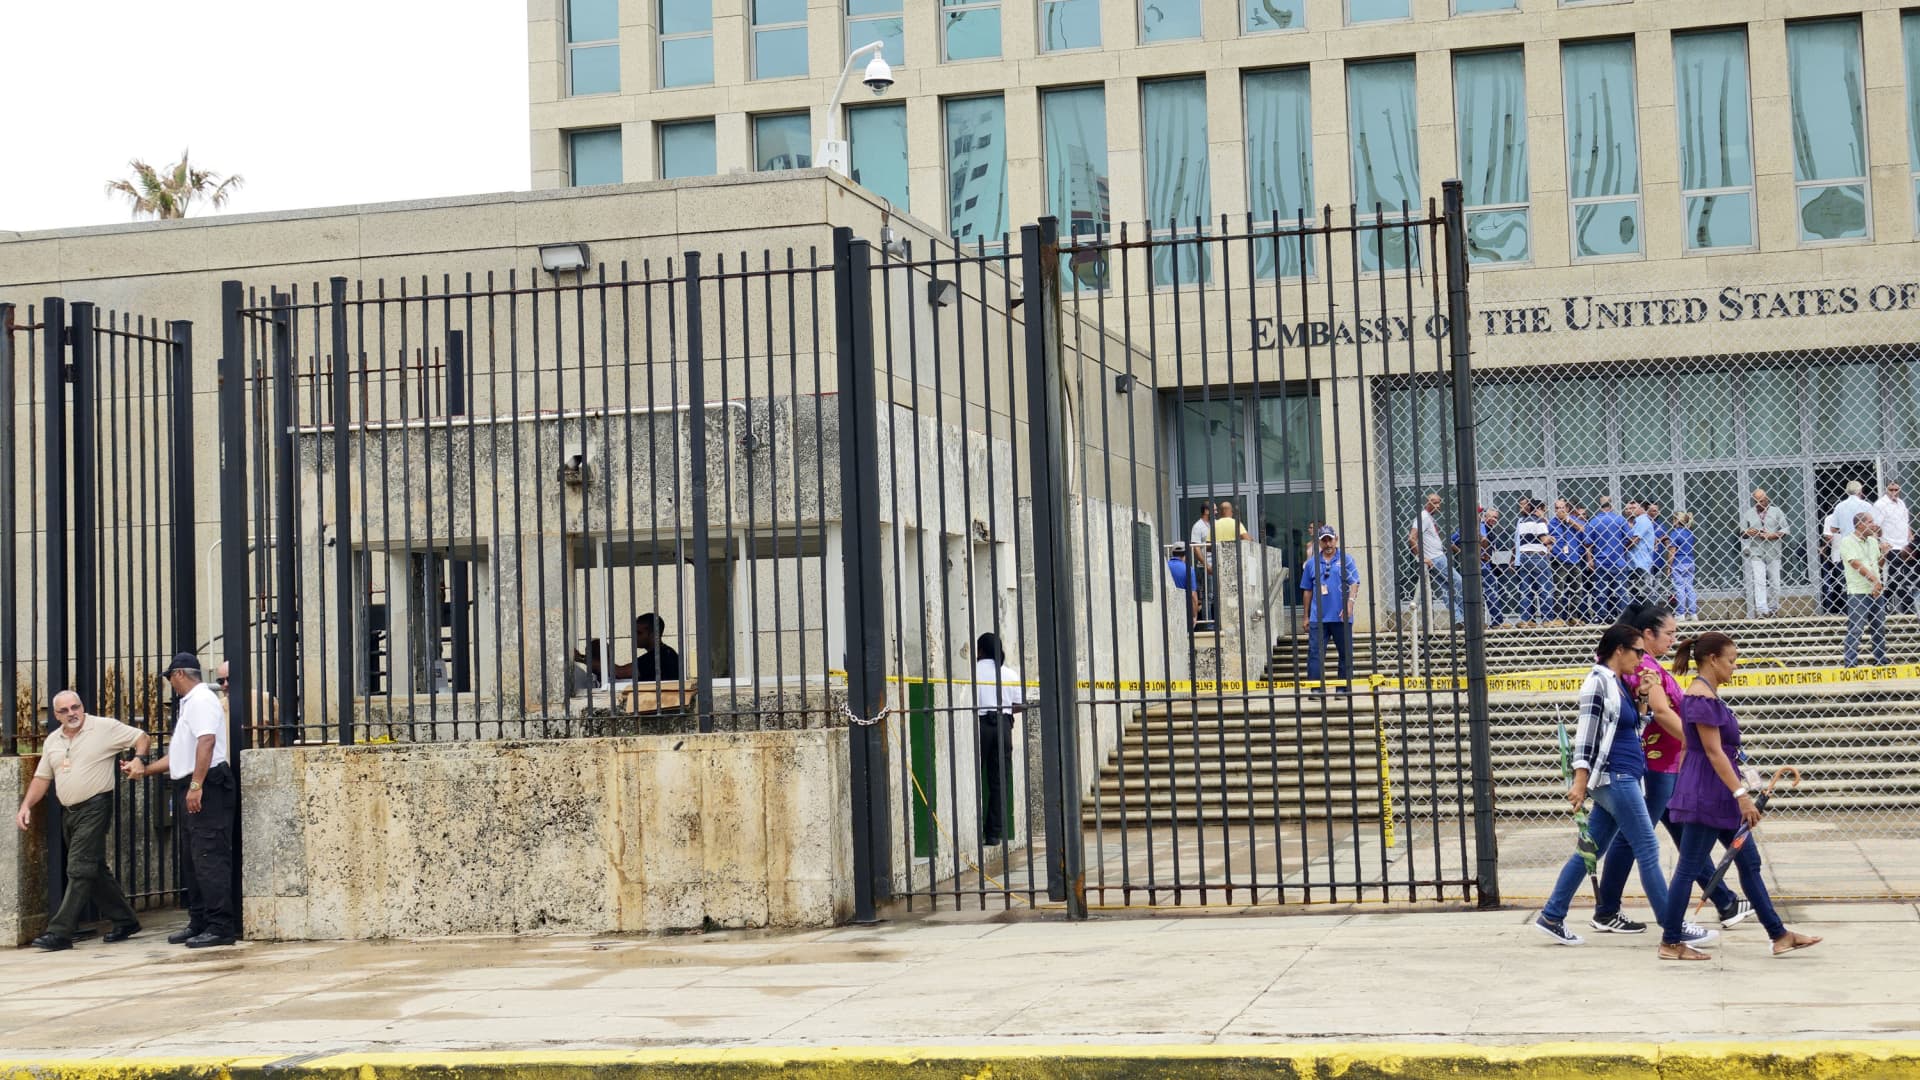 Personnel gather at the U.S. Embassy on September 29, 2017 in Havana, Cuba.